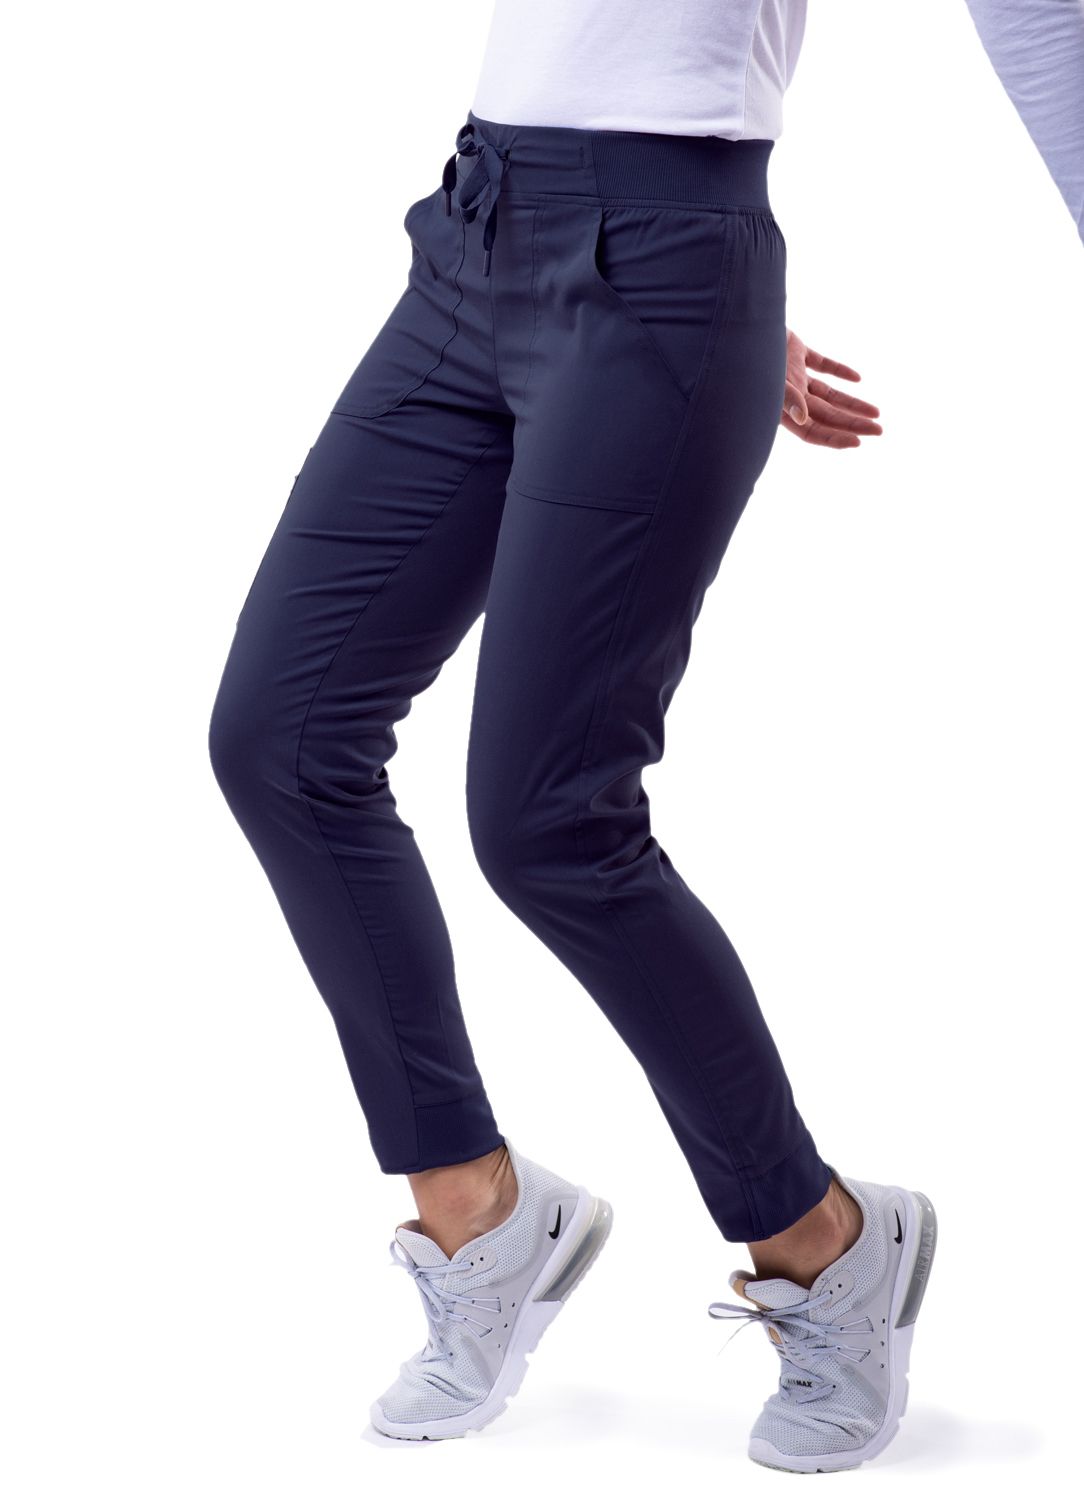 Women's Ultimate Yoga Jogger Pant (Tall)  by Adar XS-L / NAVY